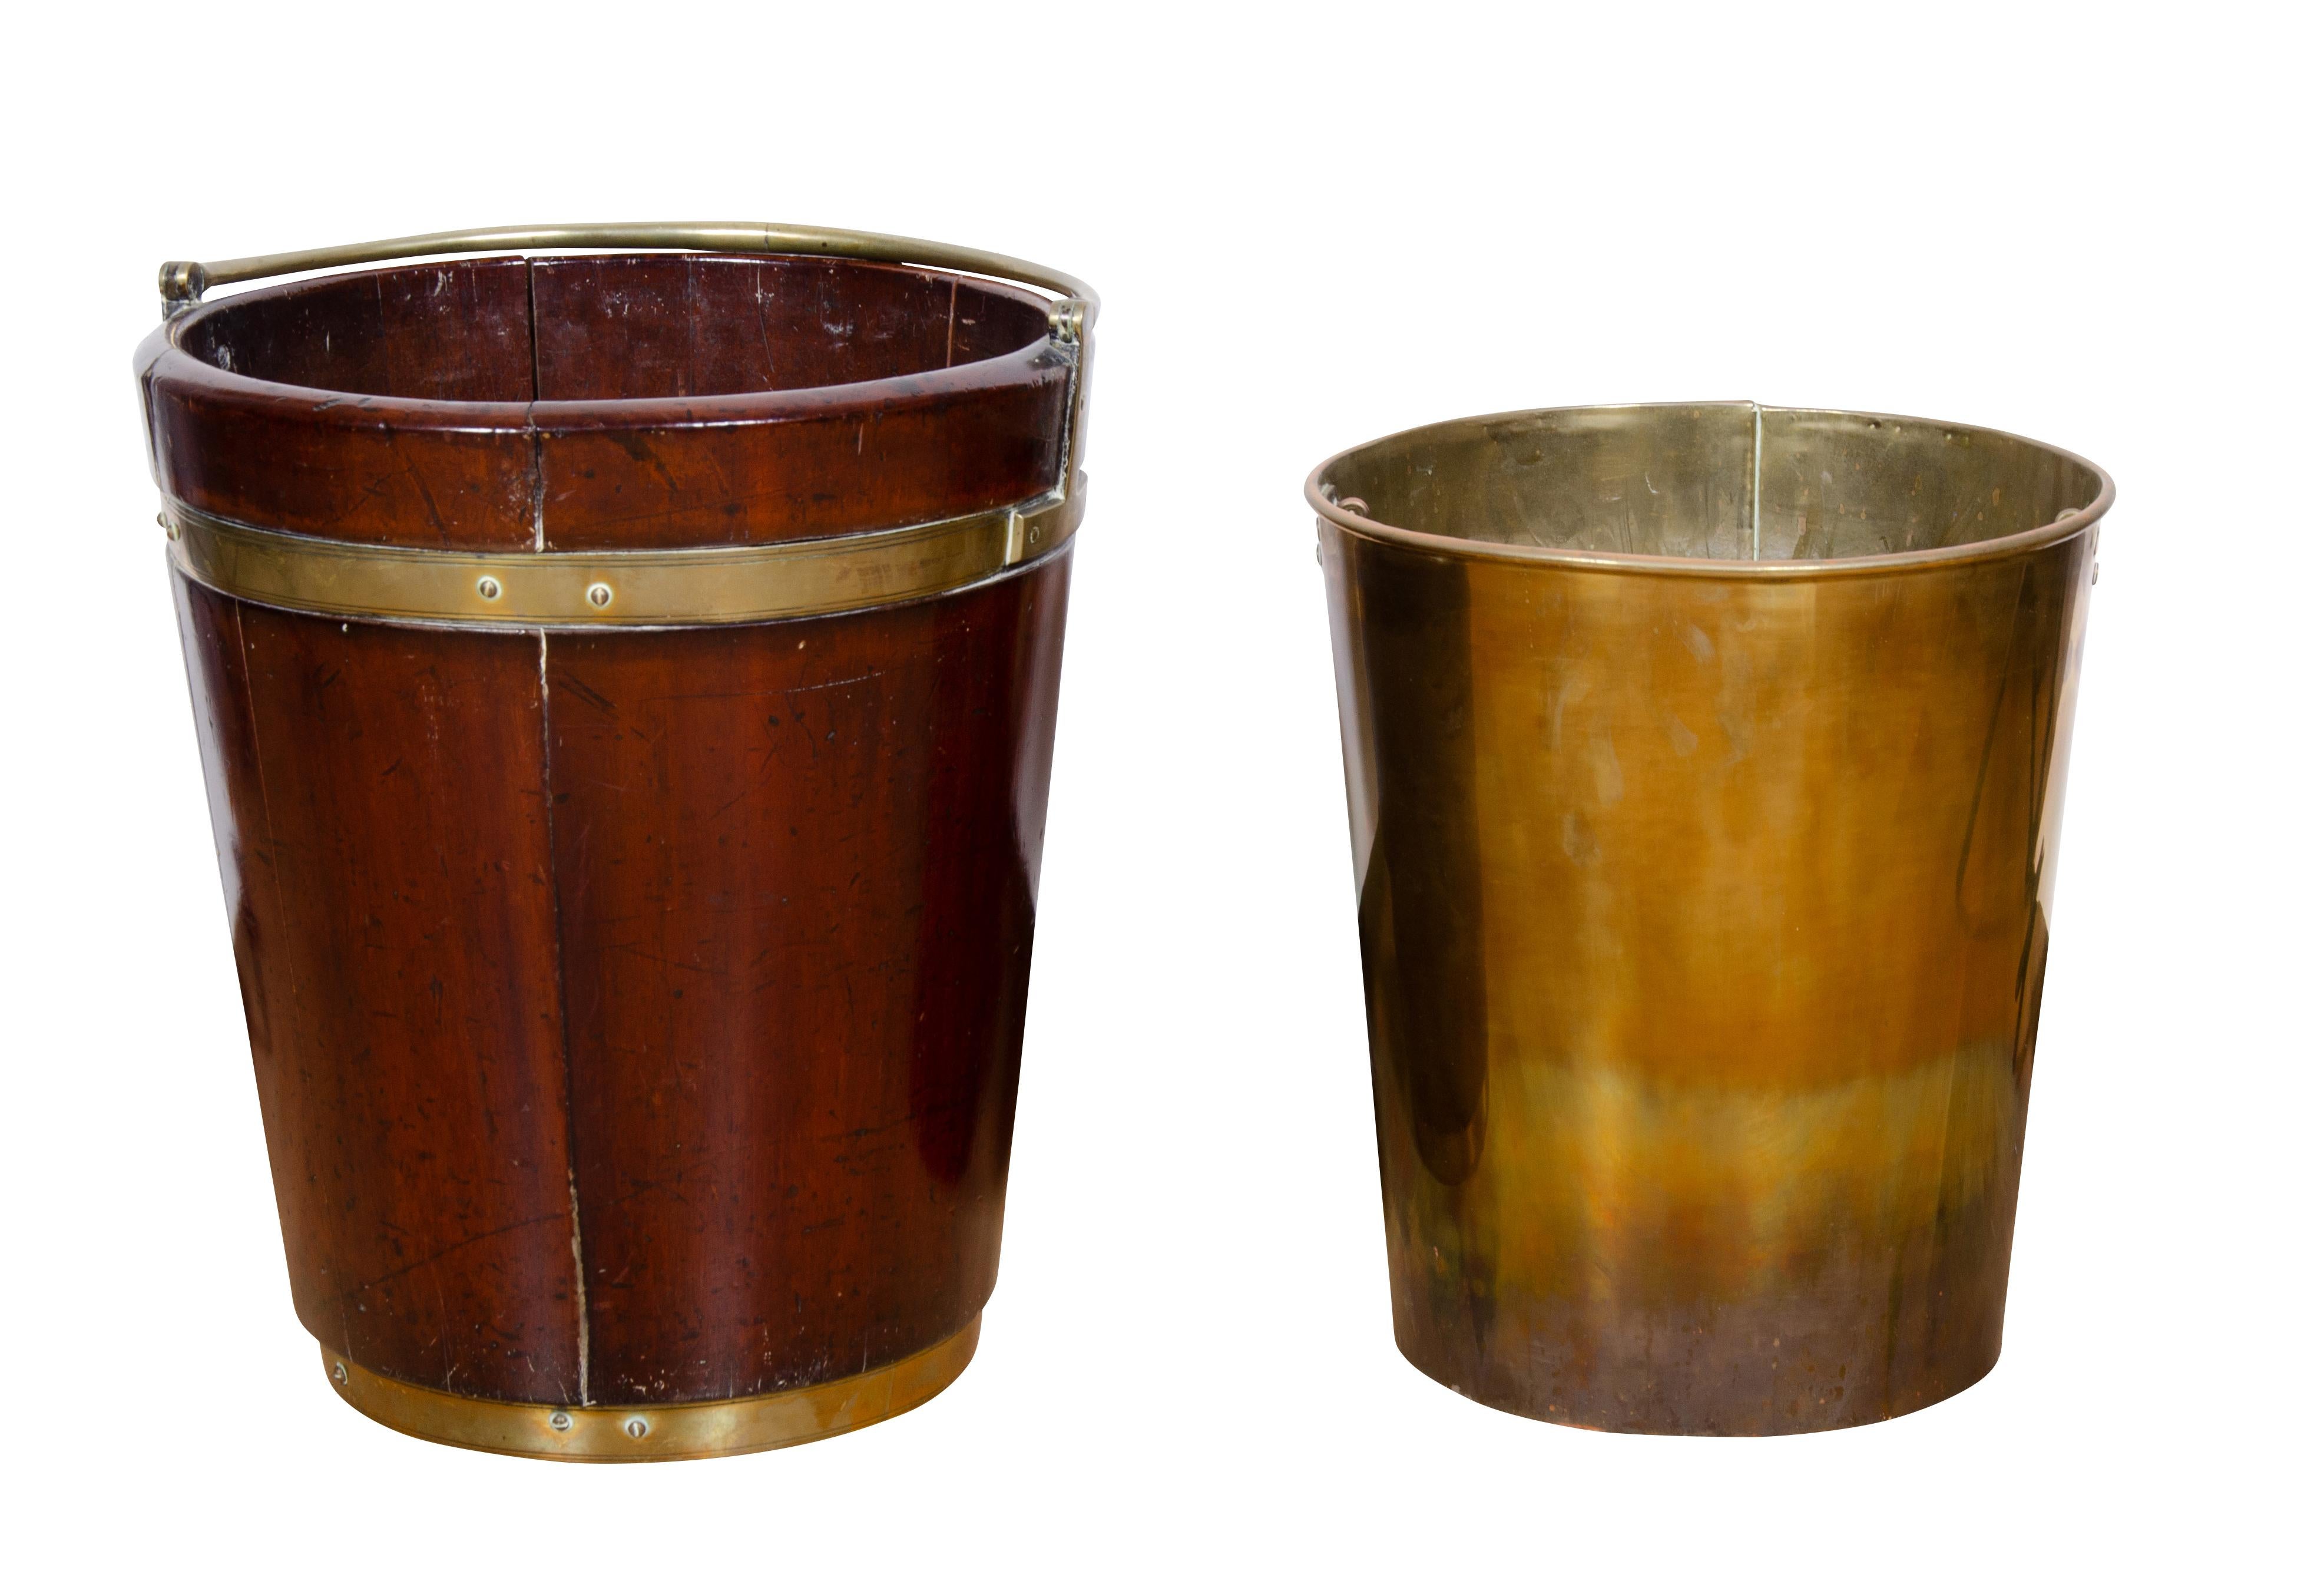 Pair of Regency Mahogany and Brass Bound Peat Buckets For Sale 2